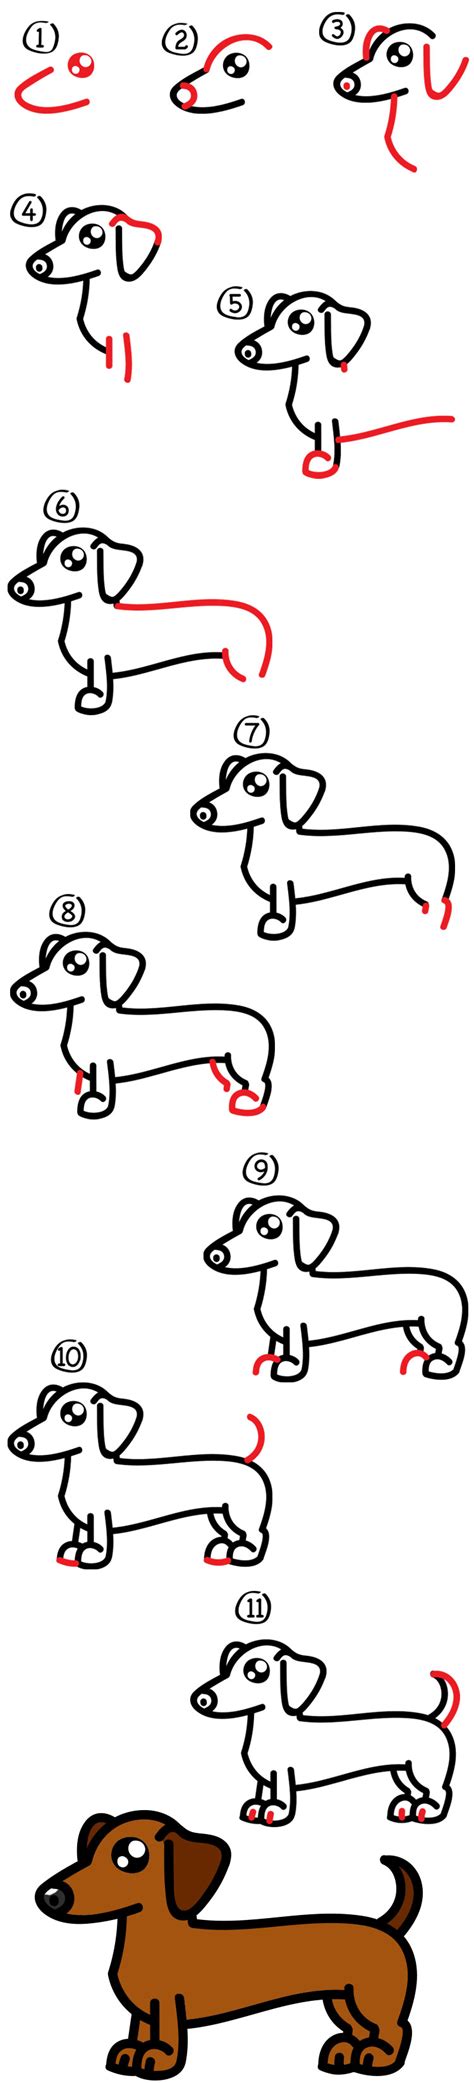 How To Draw A Dachshund Art For Kids Hub